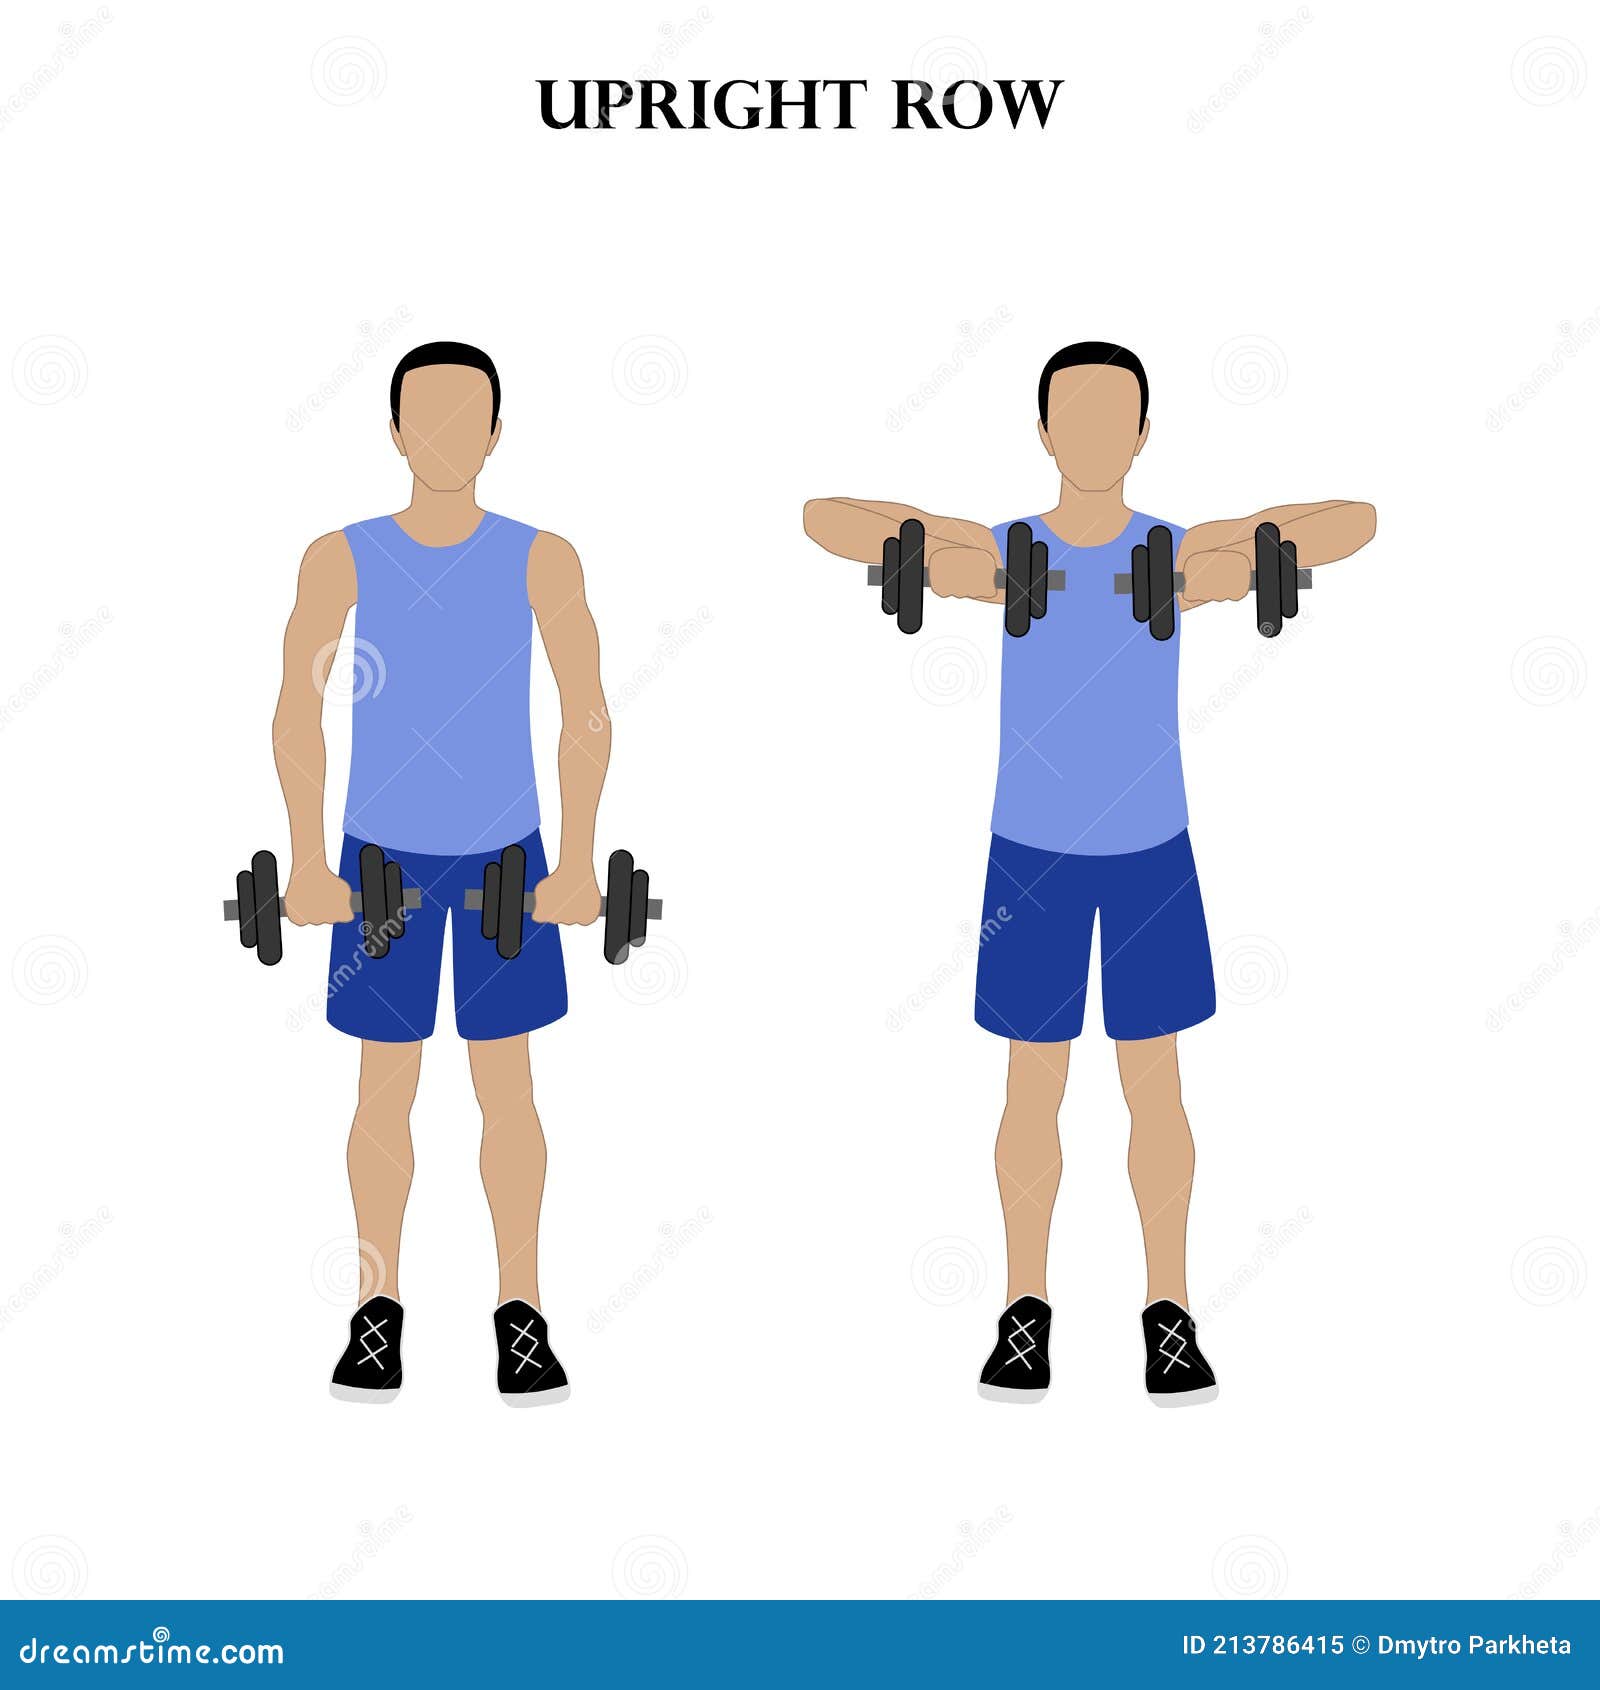 Deadlift Upright Row  Illustrated Exercise Guide